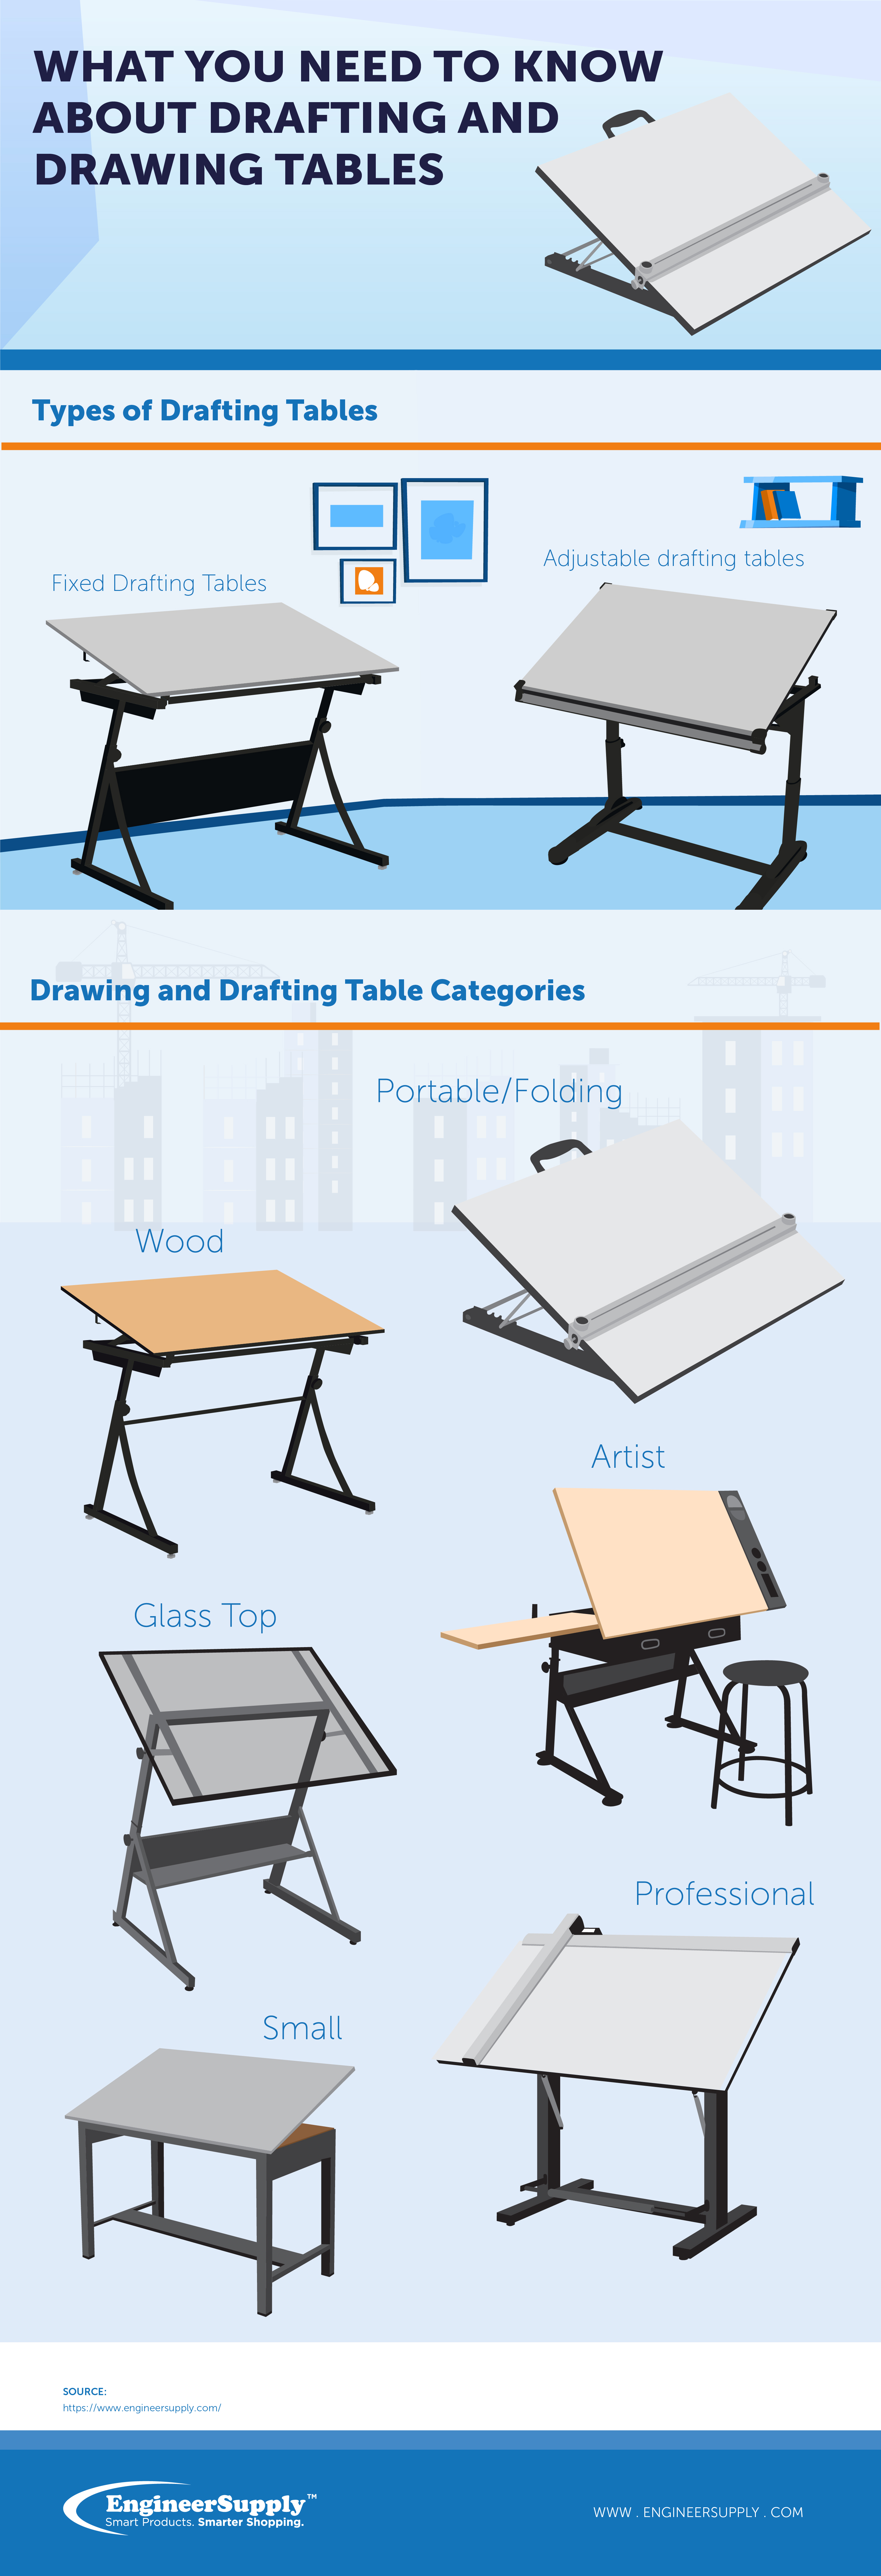 infographic-what-you-need-to-know-about-drafting-and-drawing-tables